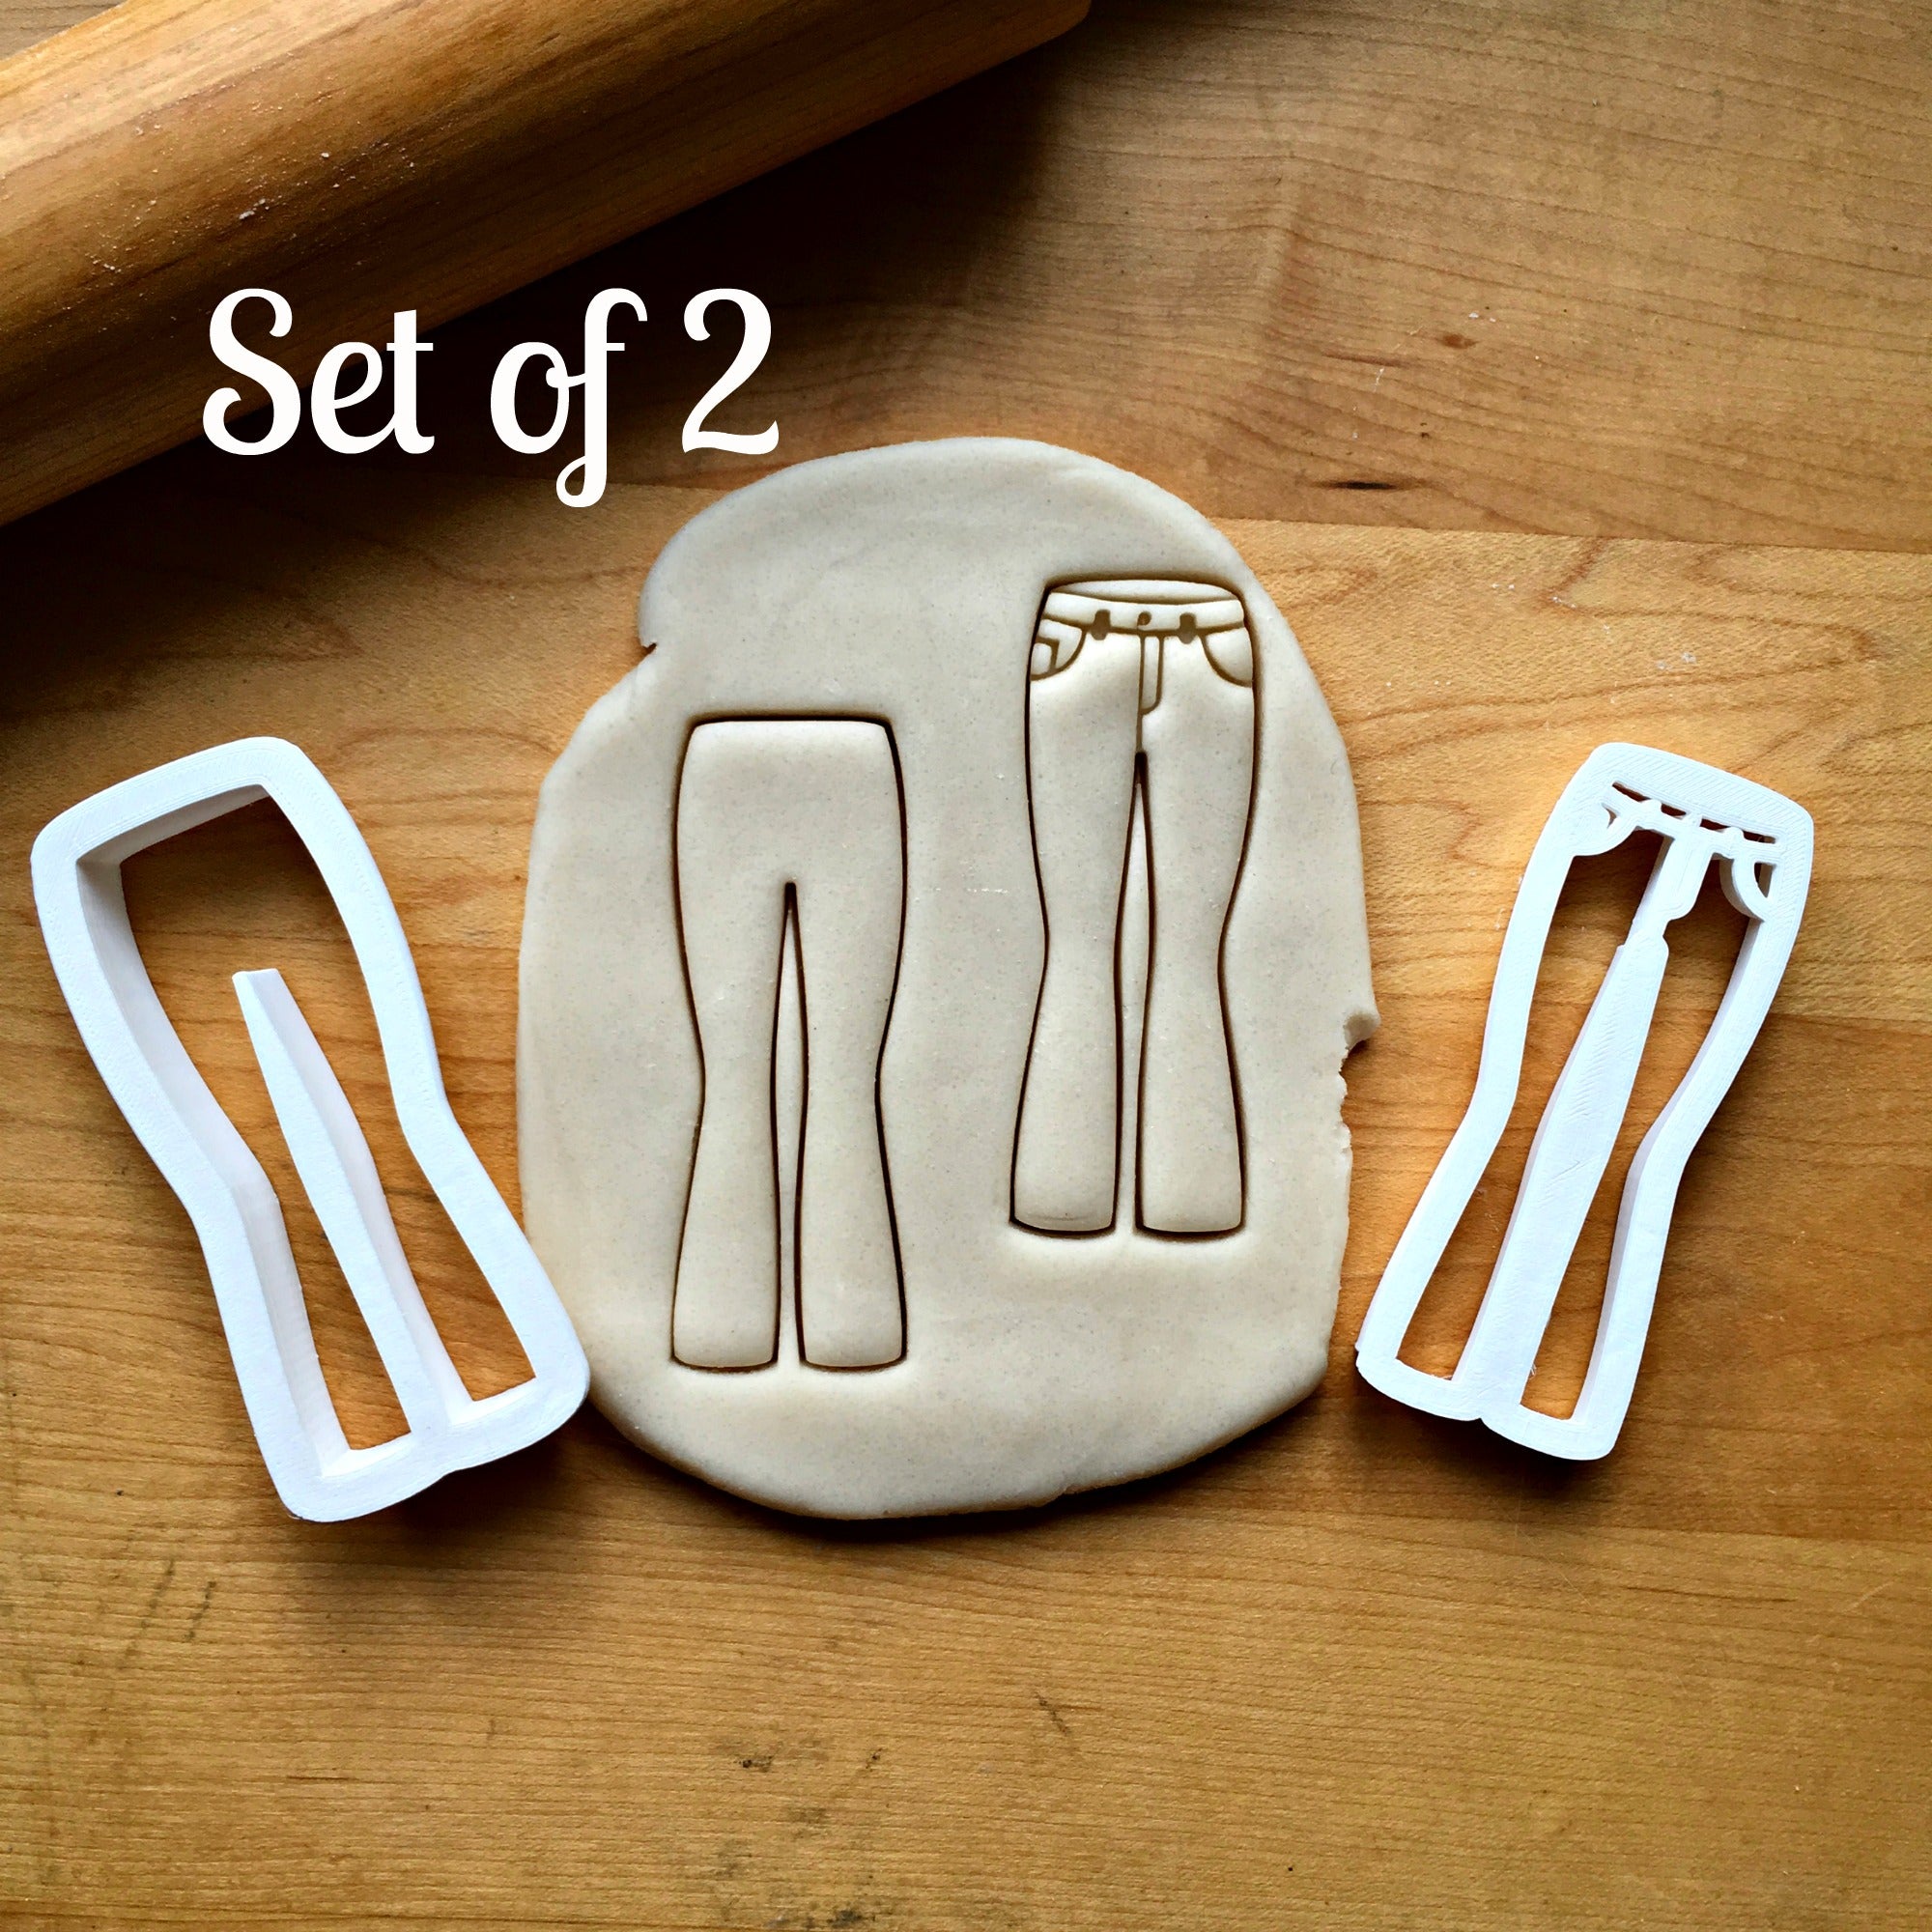 Set of 2 Skinny Jeans Cookie Cutters/Dishwasher Safe